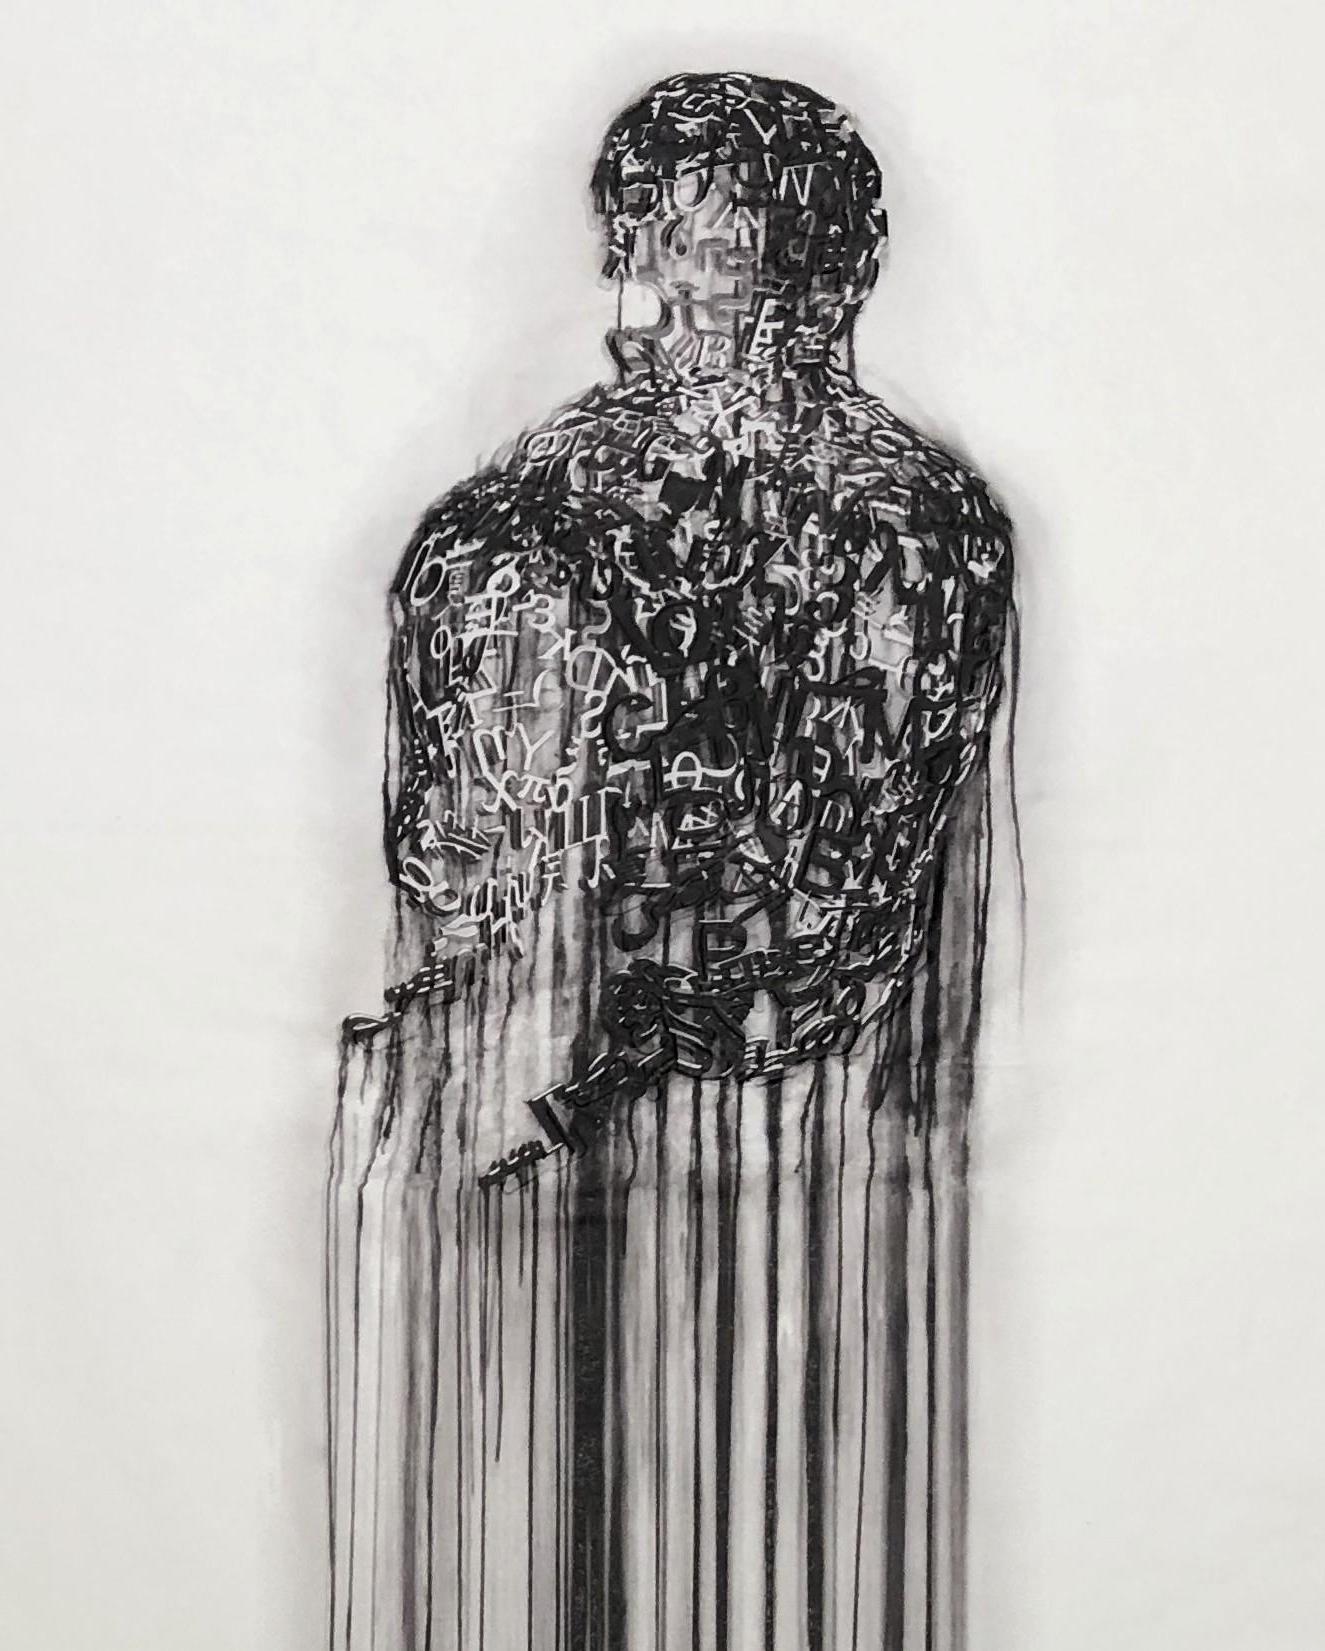 Nomade - Original Lithograph Handsigned Numbered - Print by Jaume Plensa